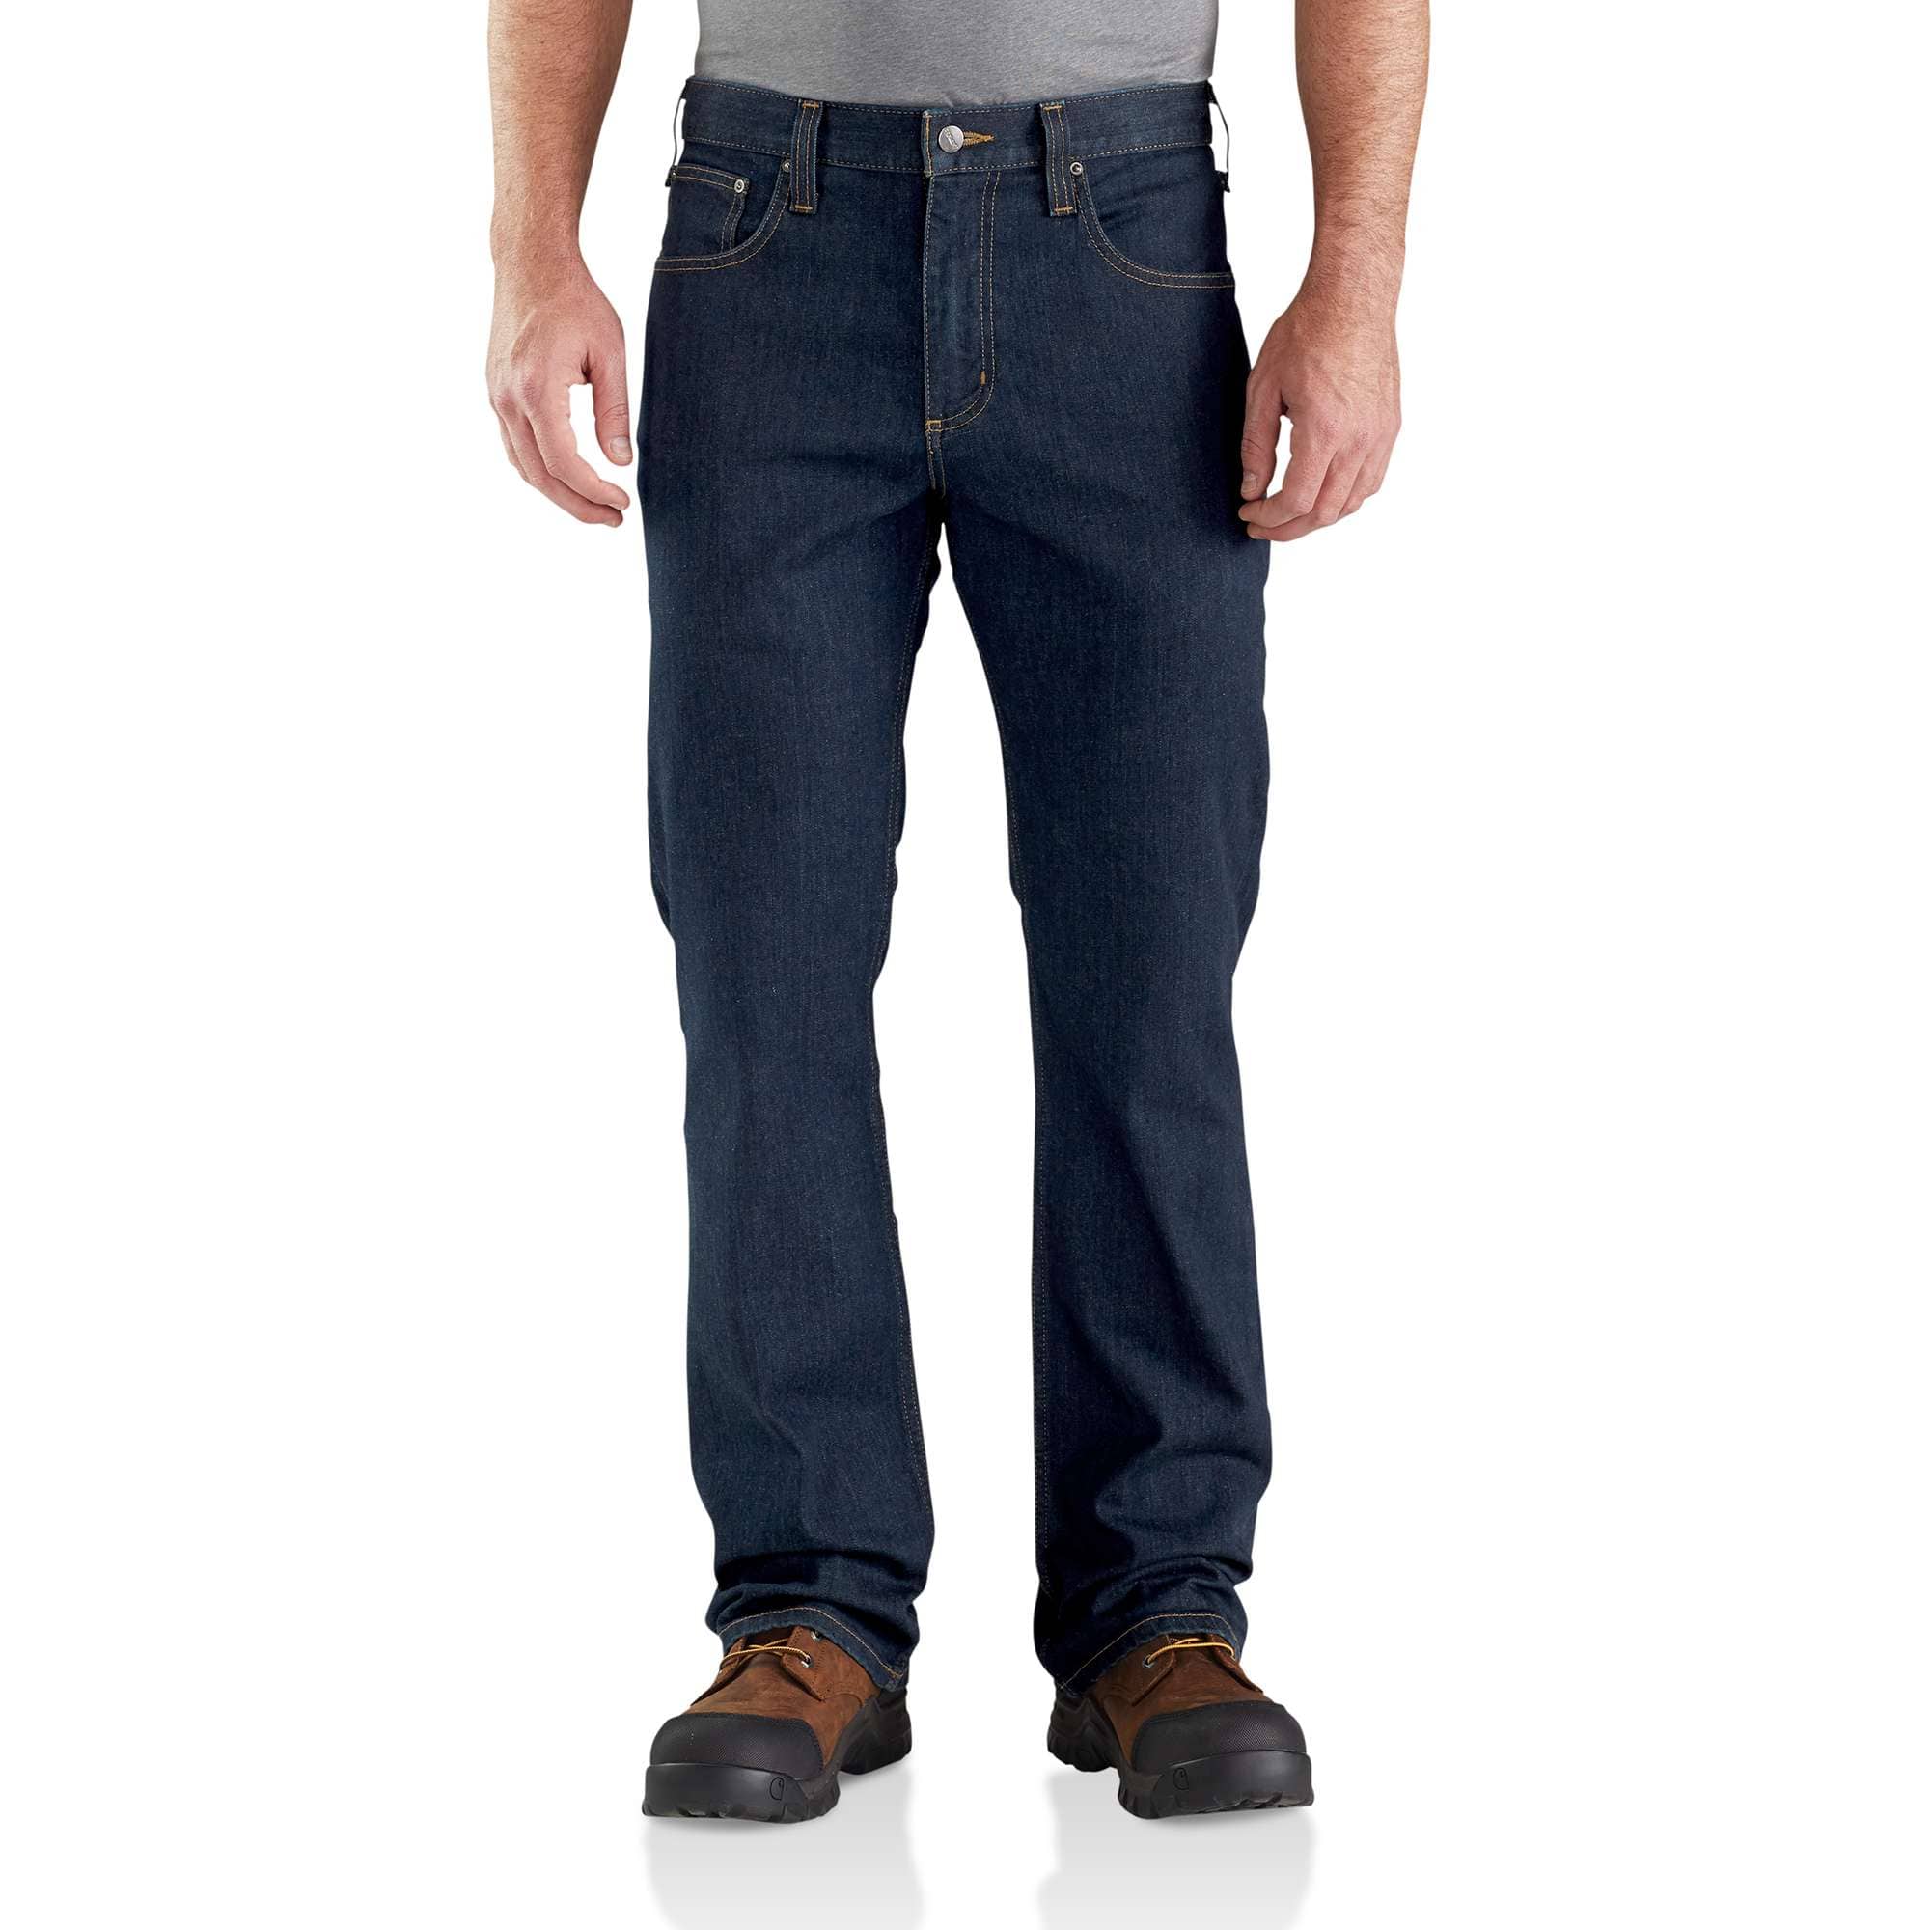 bootcut fit jeans